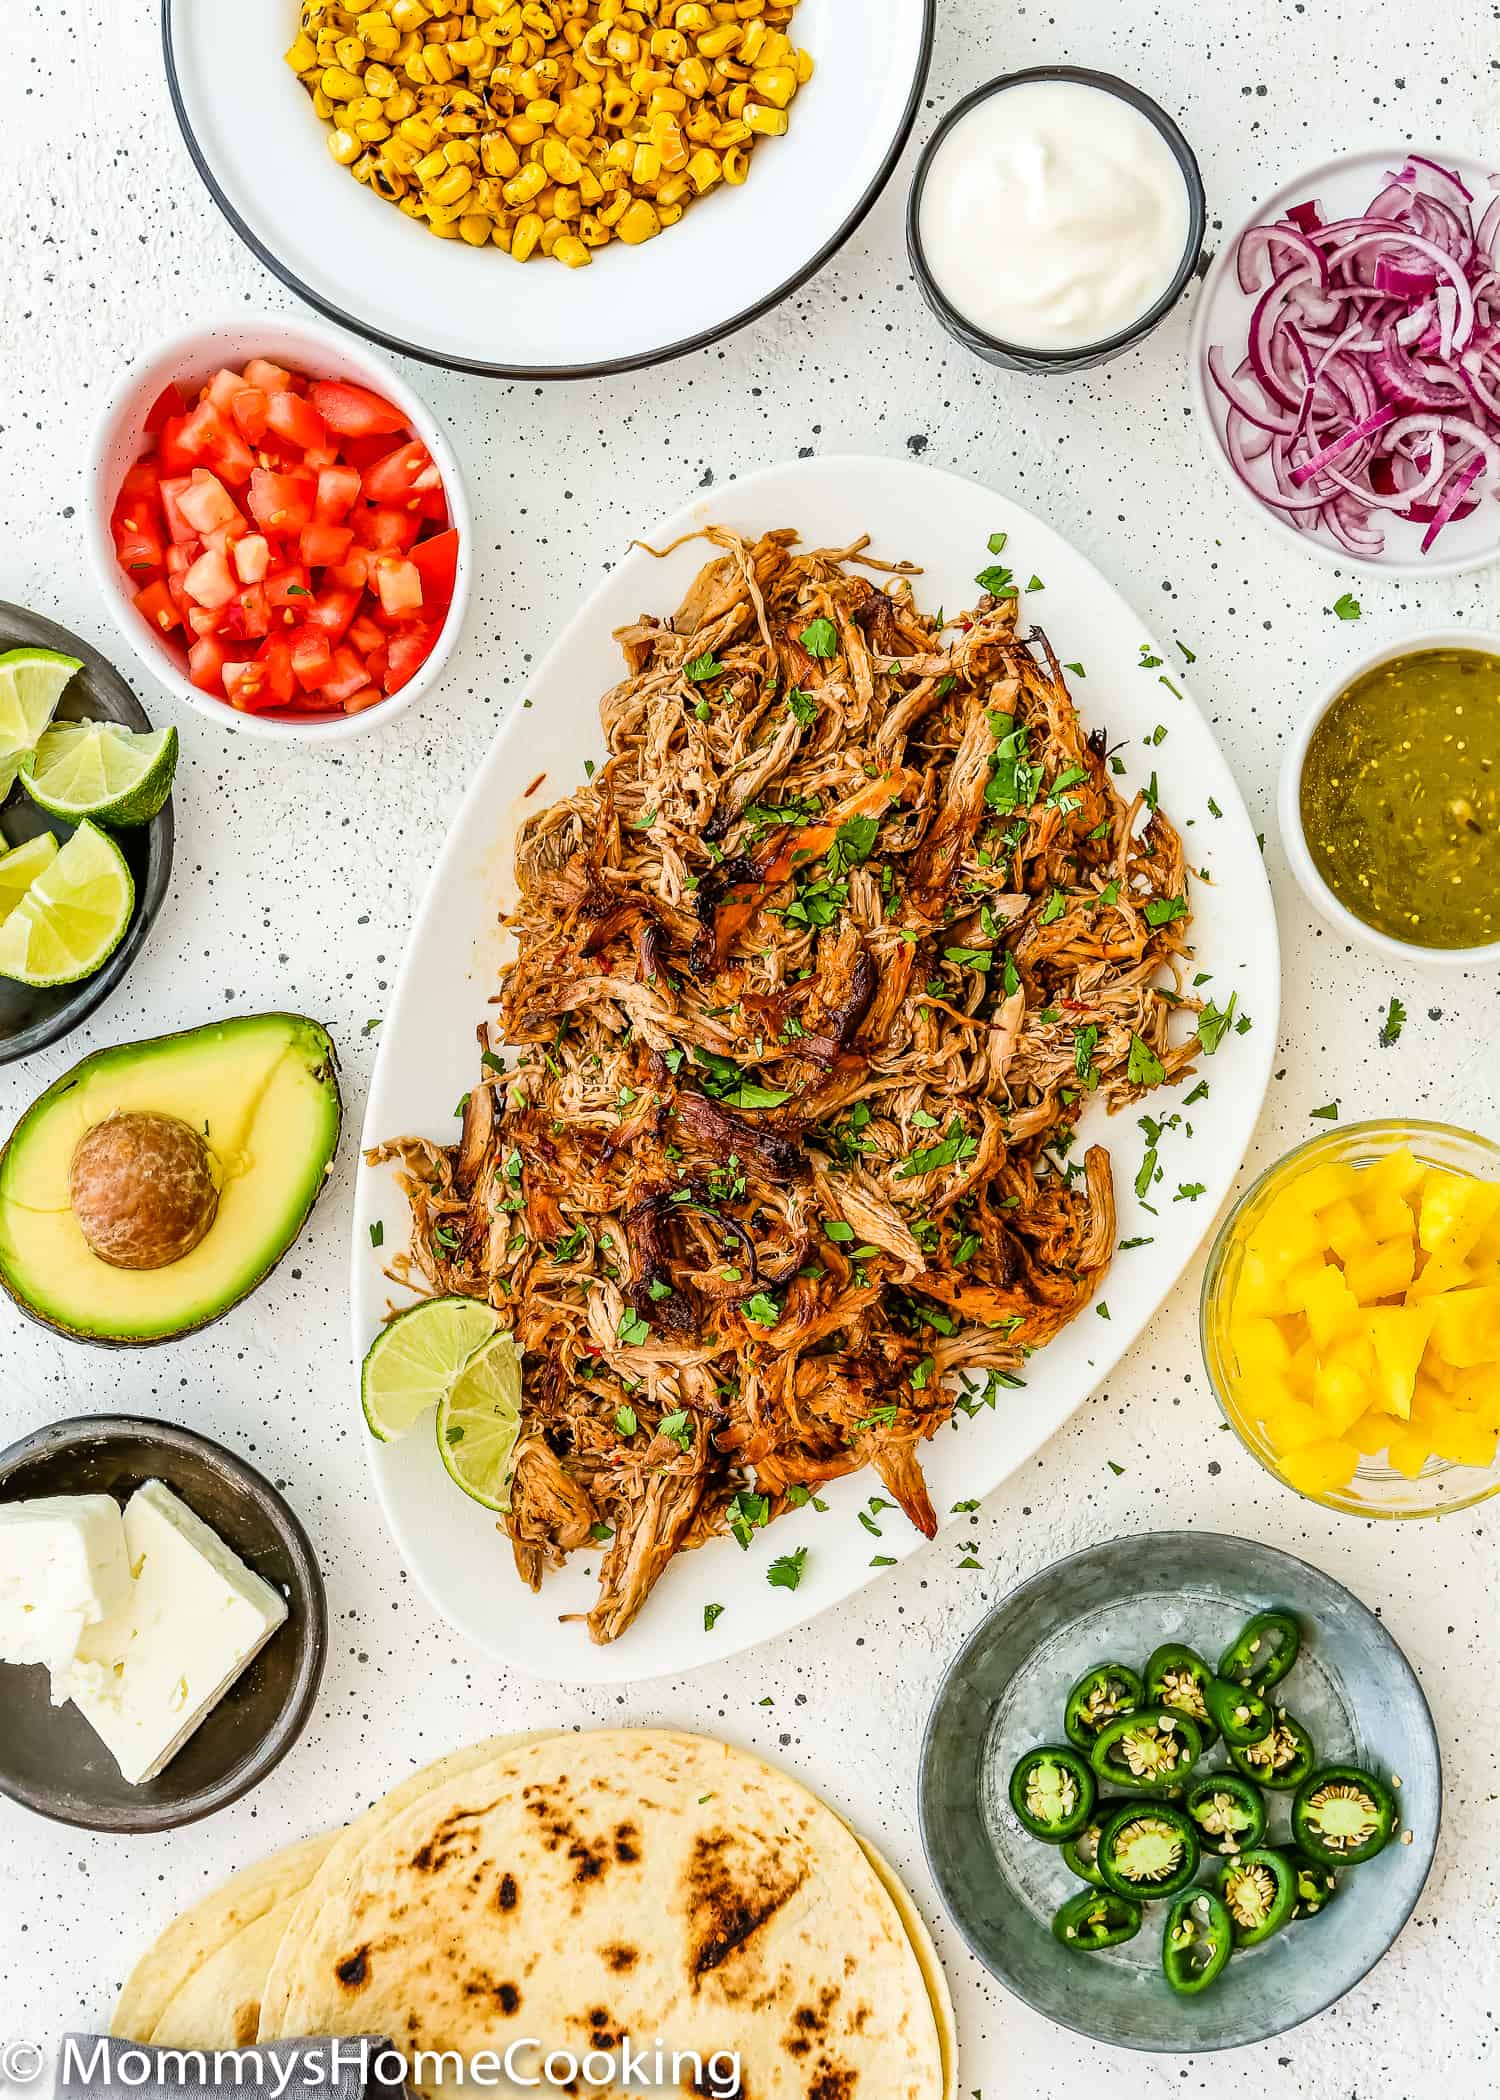 Slow Cooker Chipotle Carnitas with taco toppings on the side.